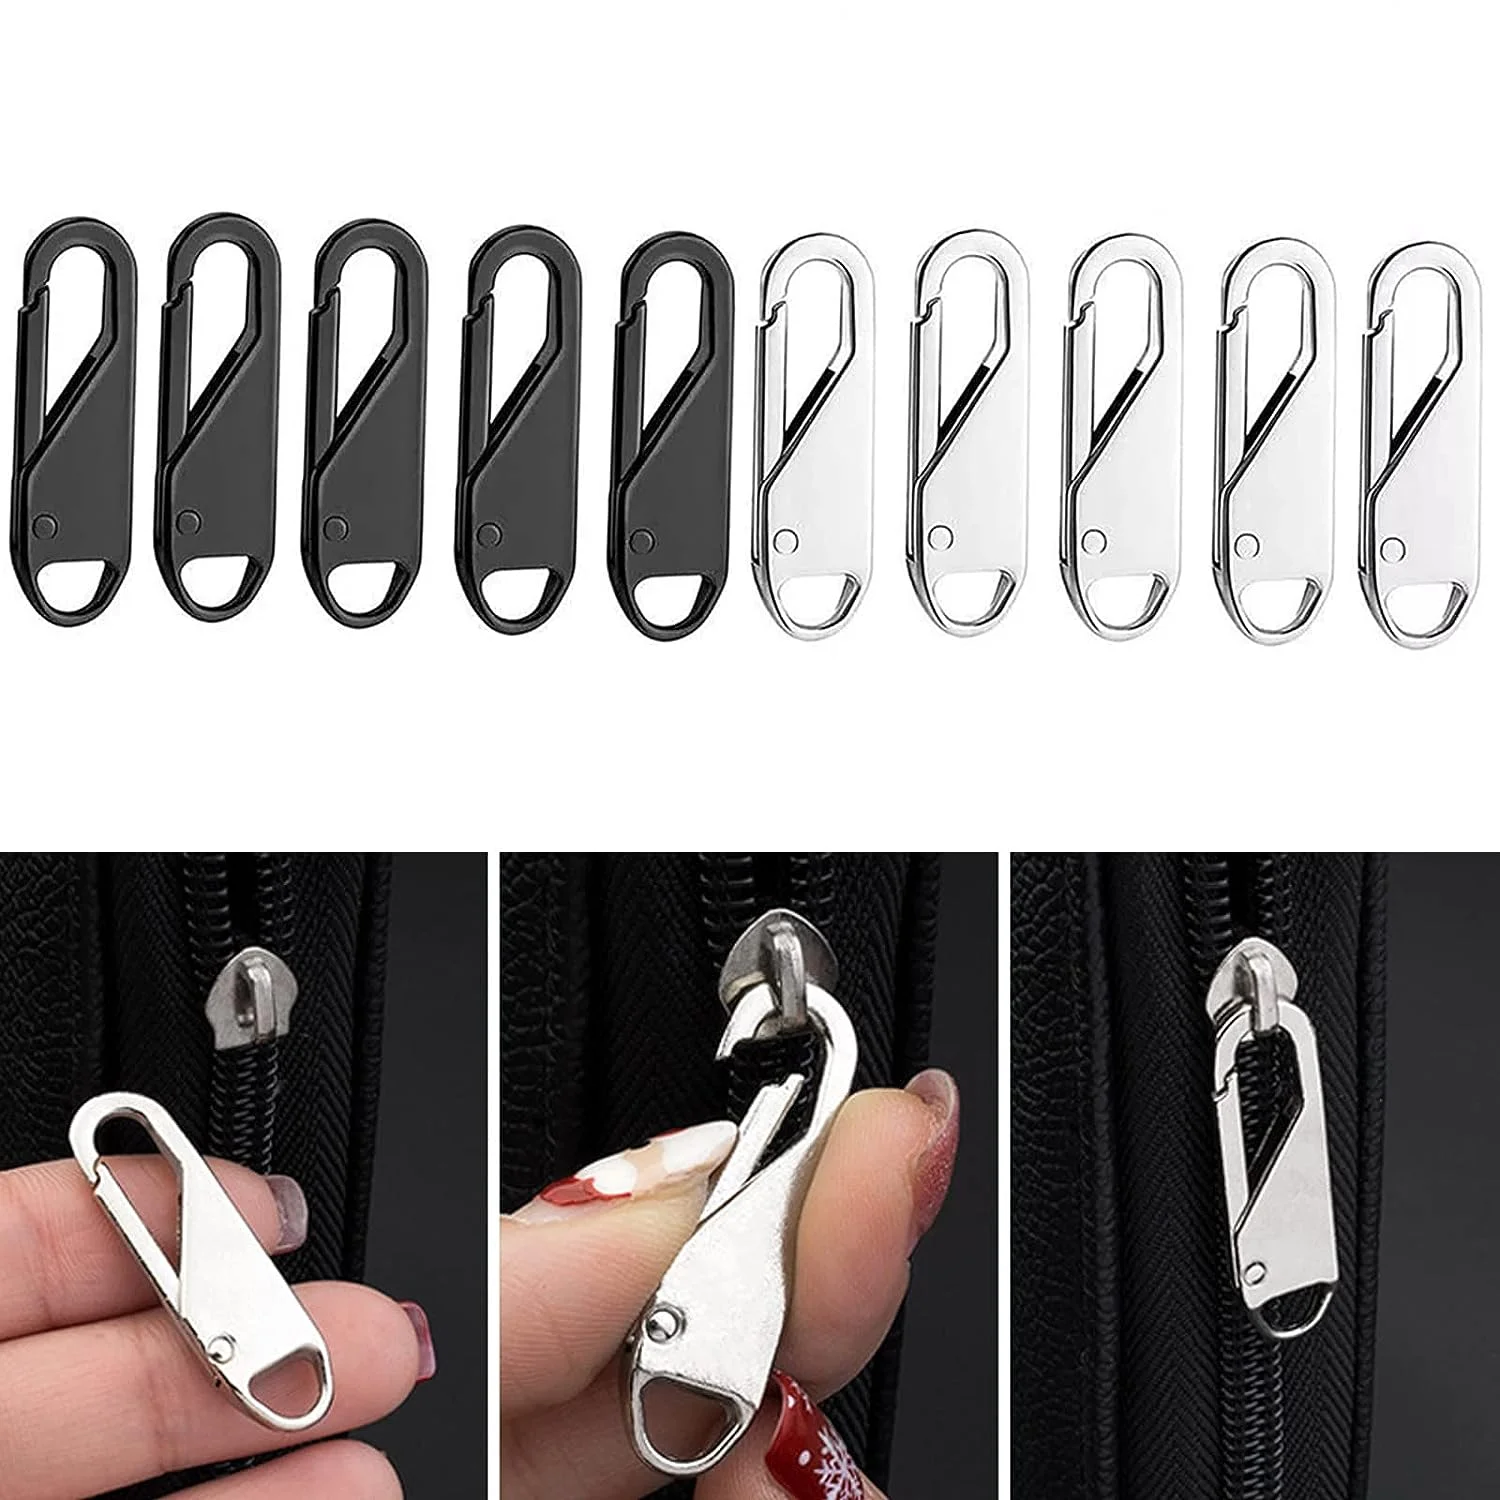 Street27 20PCS Zipper Pulls Zipper Extension Replacement for Backpacks,  Luggage Bags Zipper Pull Price in India - Buy Street27 20PCS Zipper Pulls  Zipper Extension Replacement for Backpacks, Luggage Bags Zipper Pull online